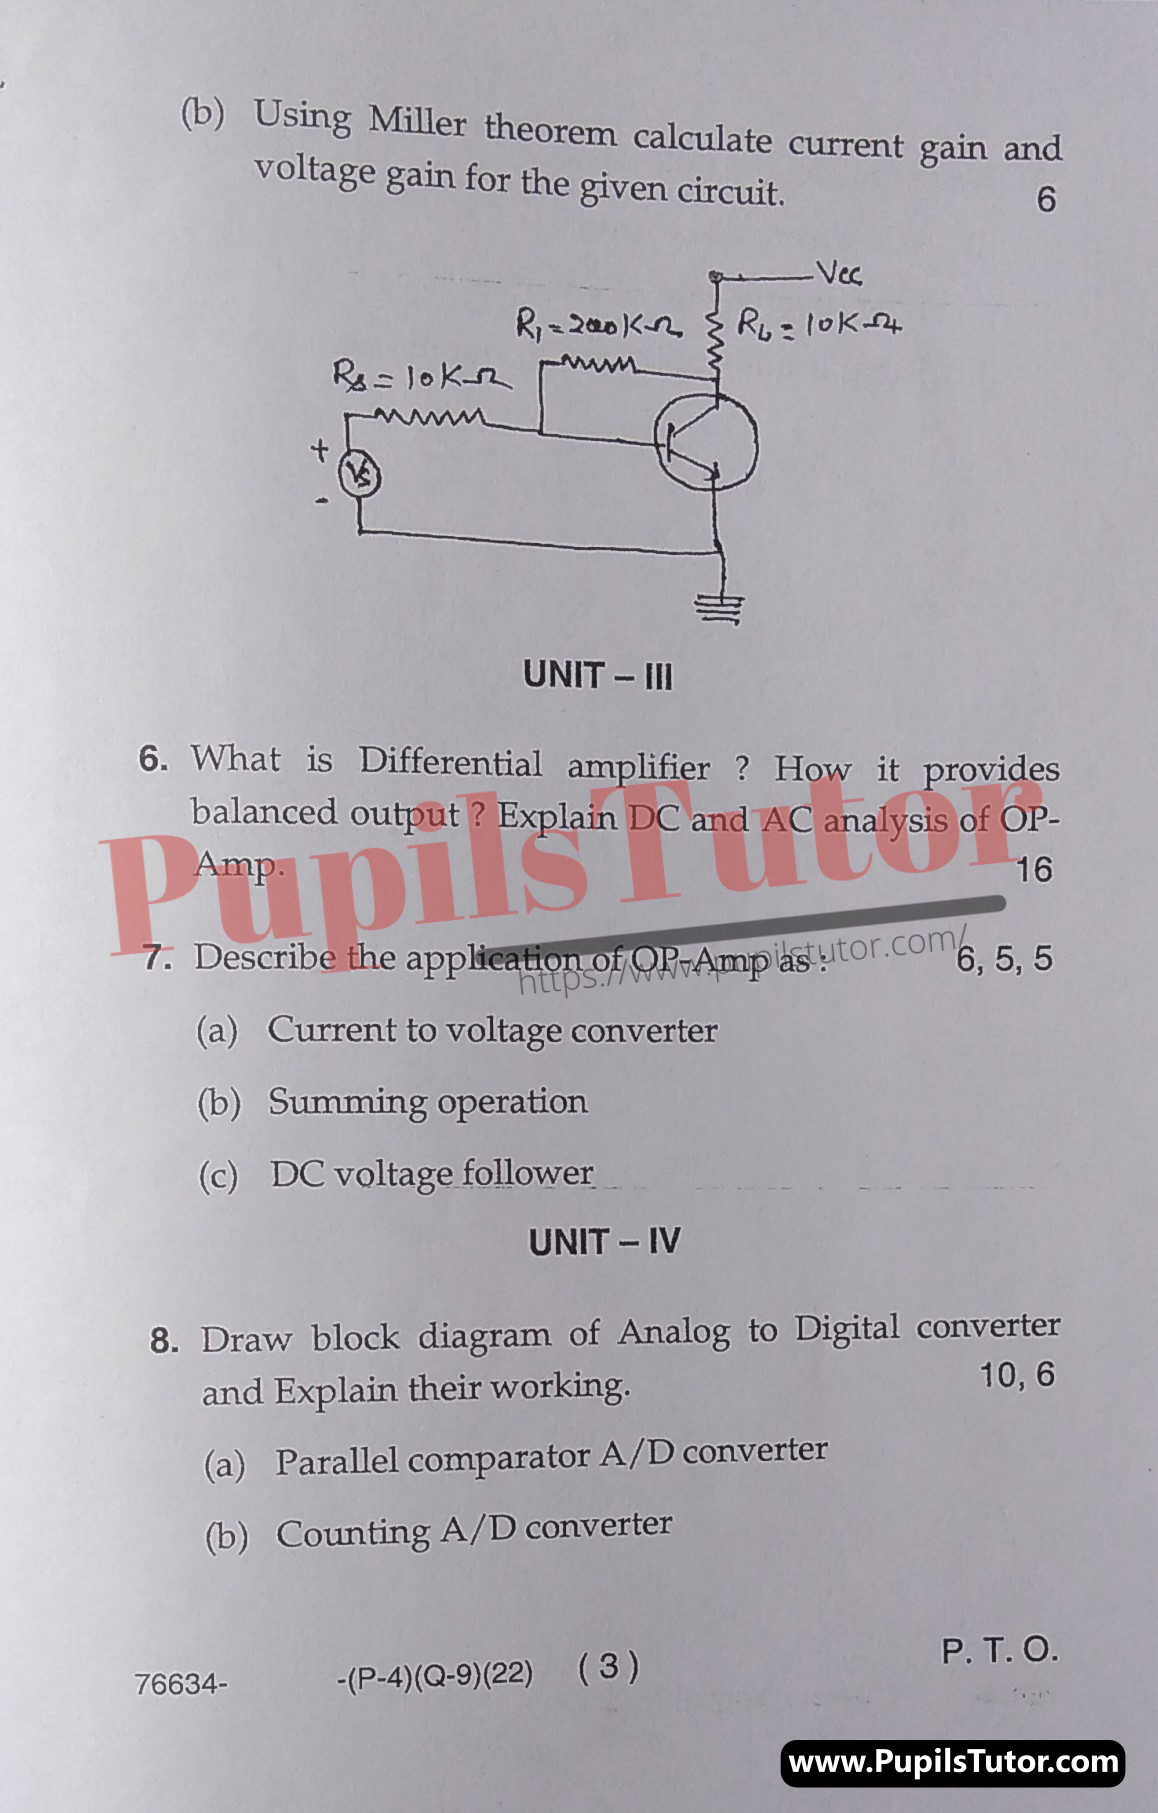 Free Download PDF Of M.D. University M.Sc. [Physics] Third Semester Latest Question Paper For Electronics Subject (Page 3) - https://www.pupilstutor.com